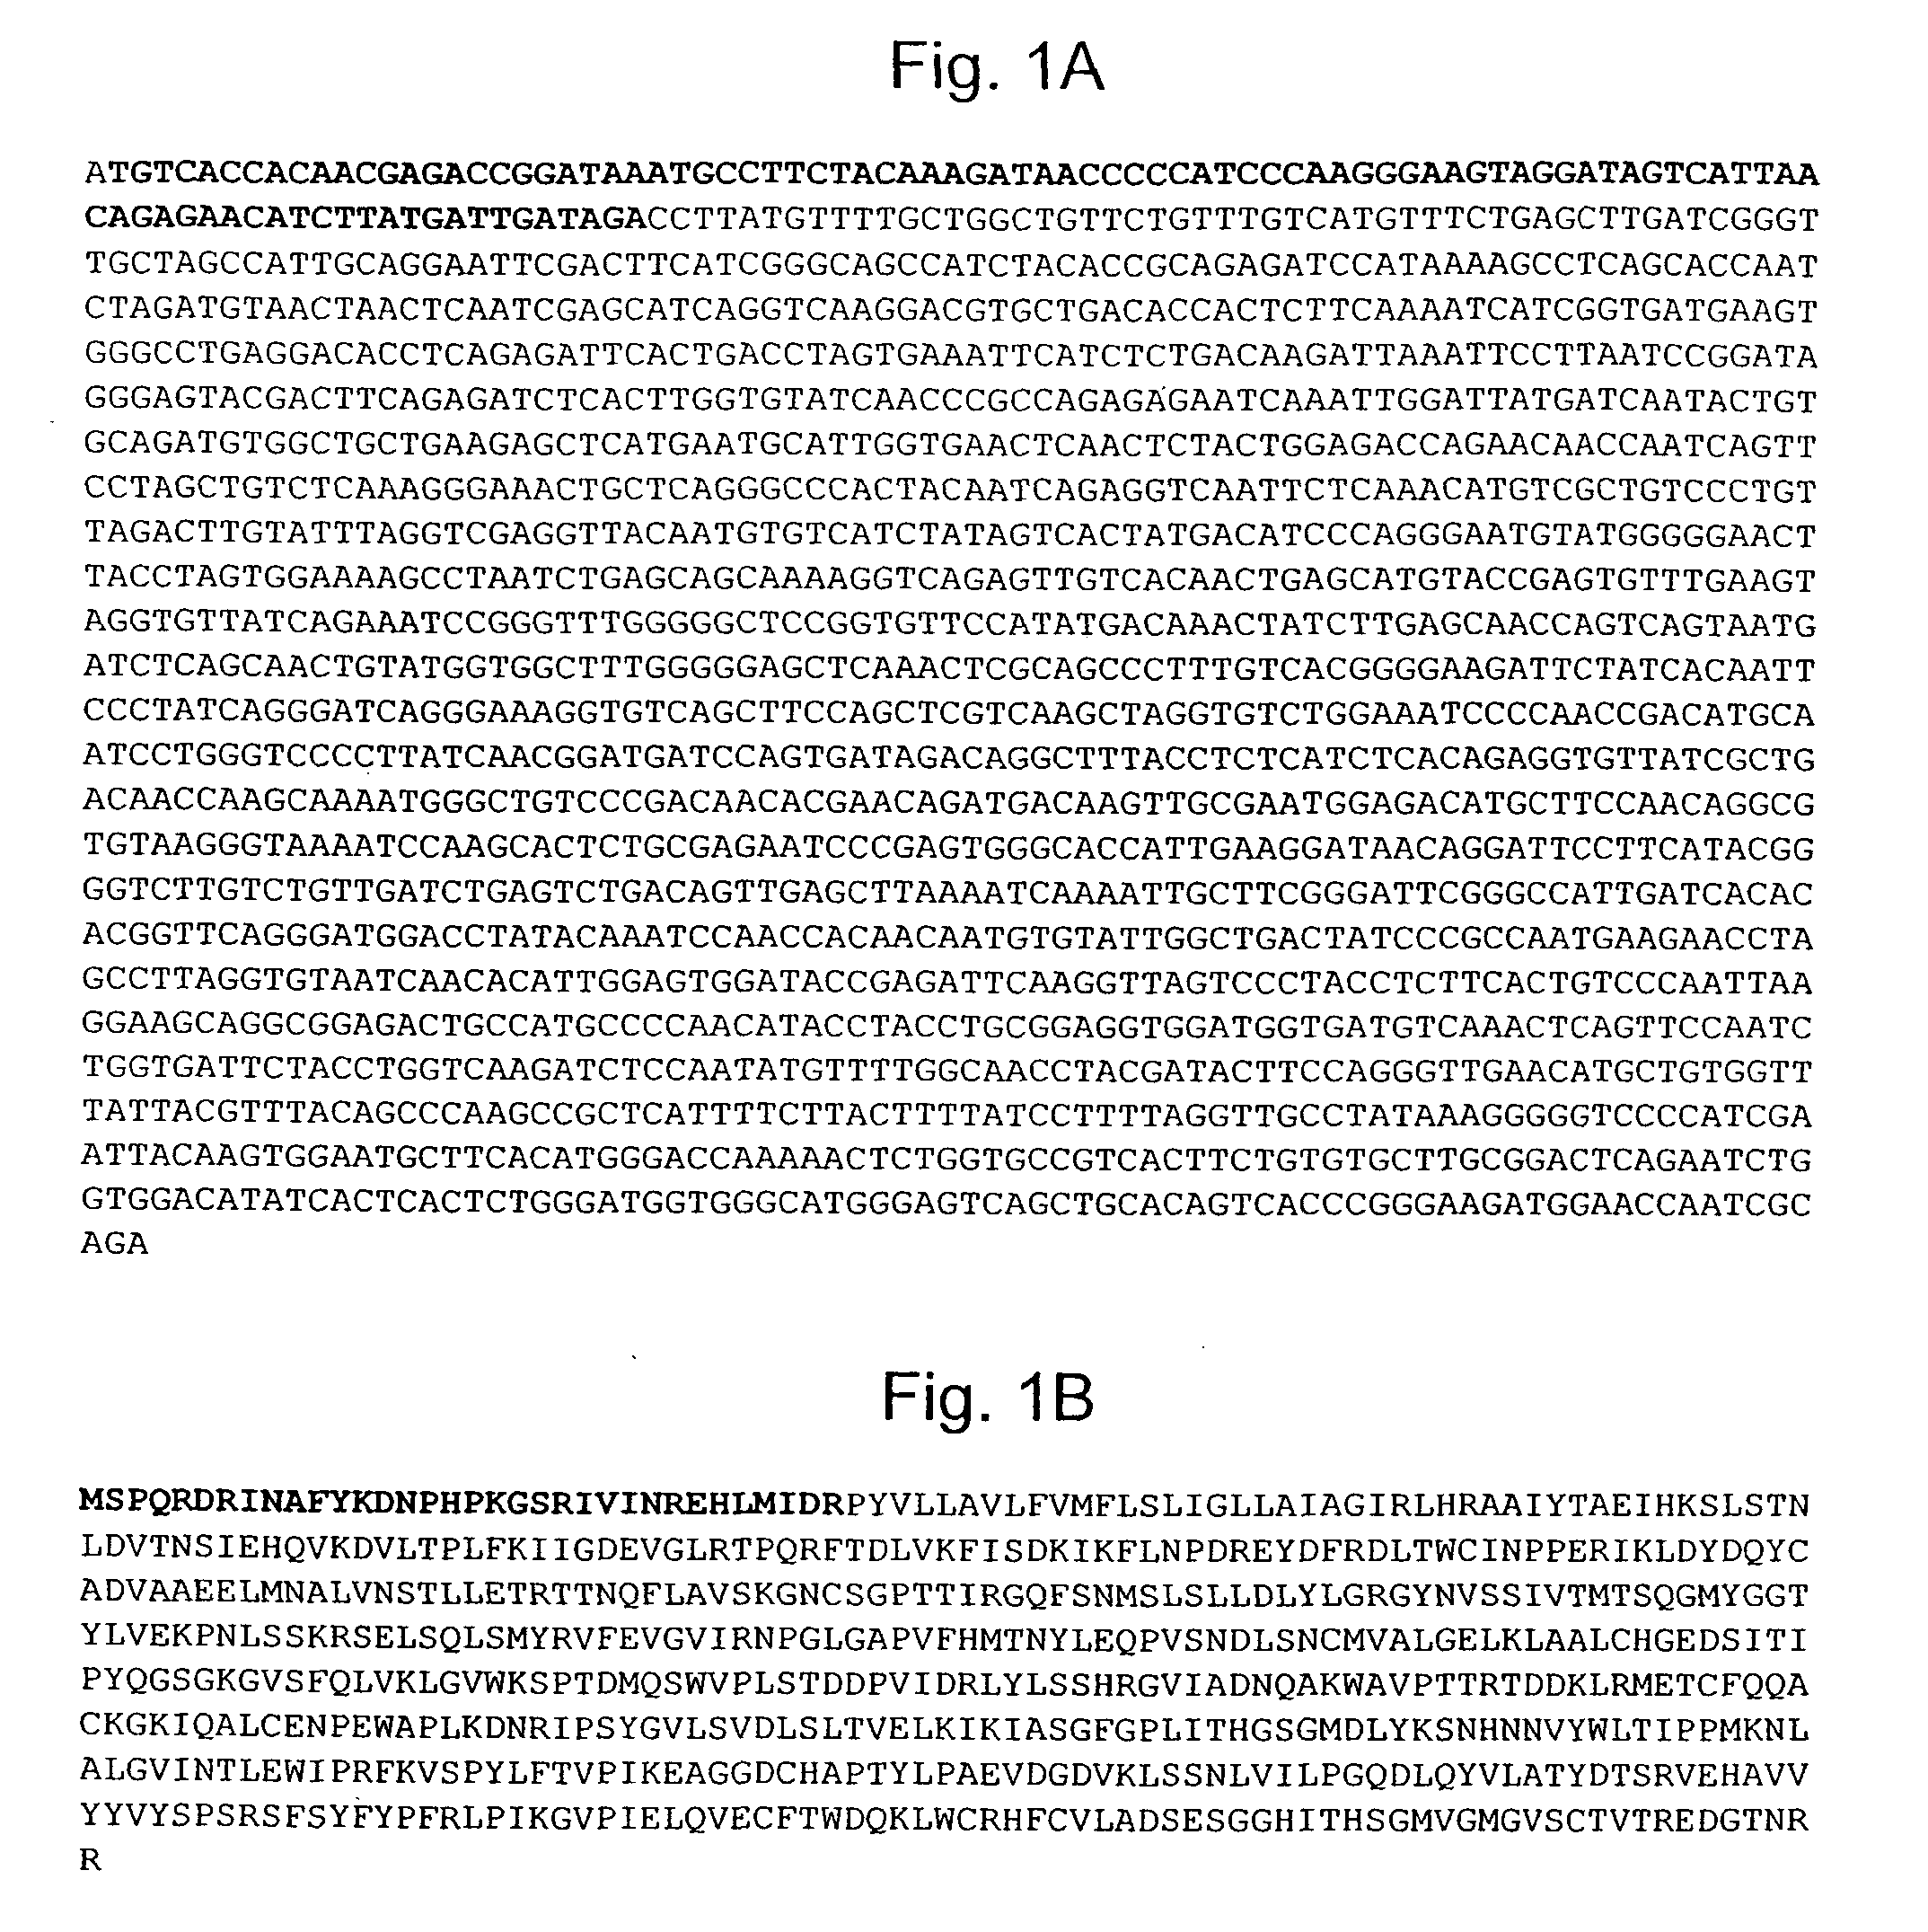 Pseudotyping of retroviral vectors, methods for production and use thereof for targeted gene transfer and high throughput screening